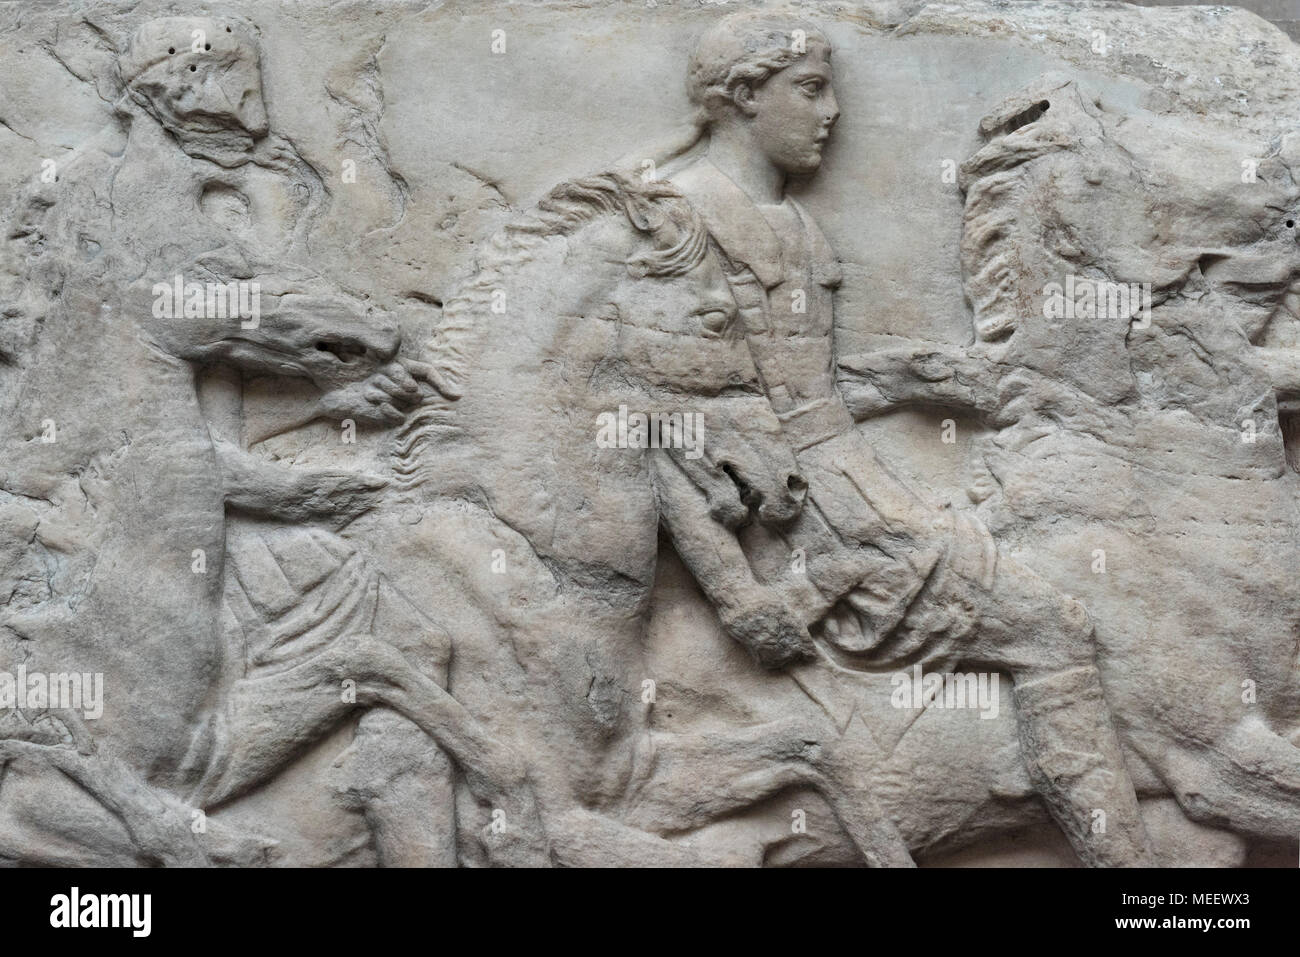 London. England. British Museum, Parthenon Frieze (Elgin Marbles), horsemen from the South Frieze, from the Parthenon on the Acropolis in Athens, ca.  Stock Photo